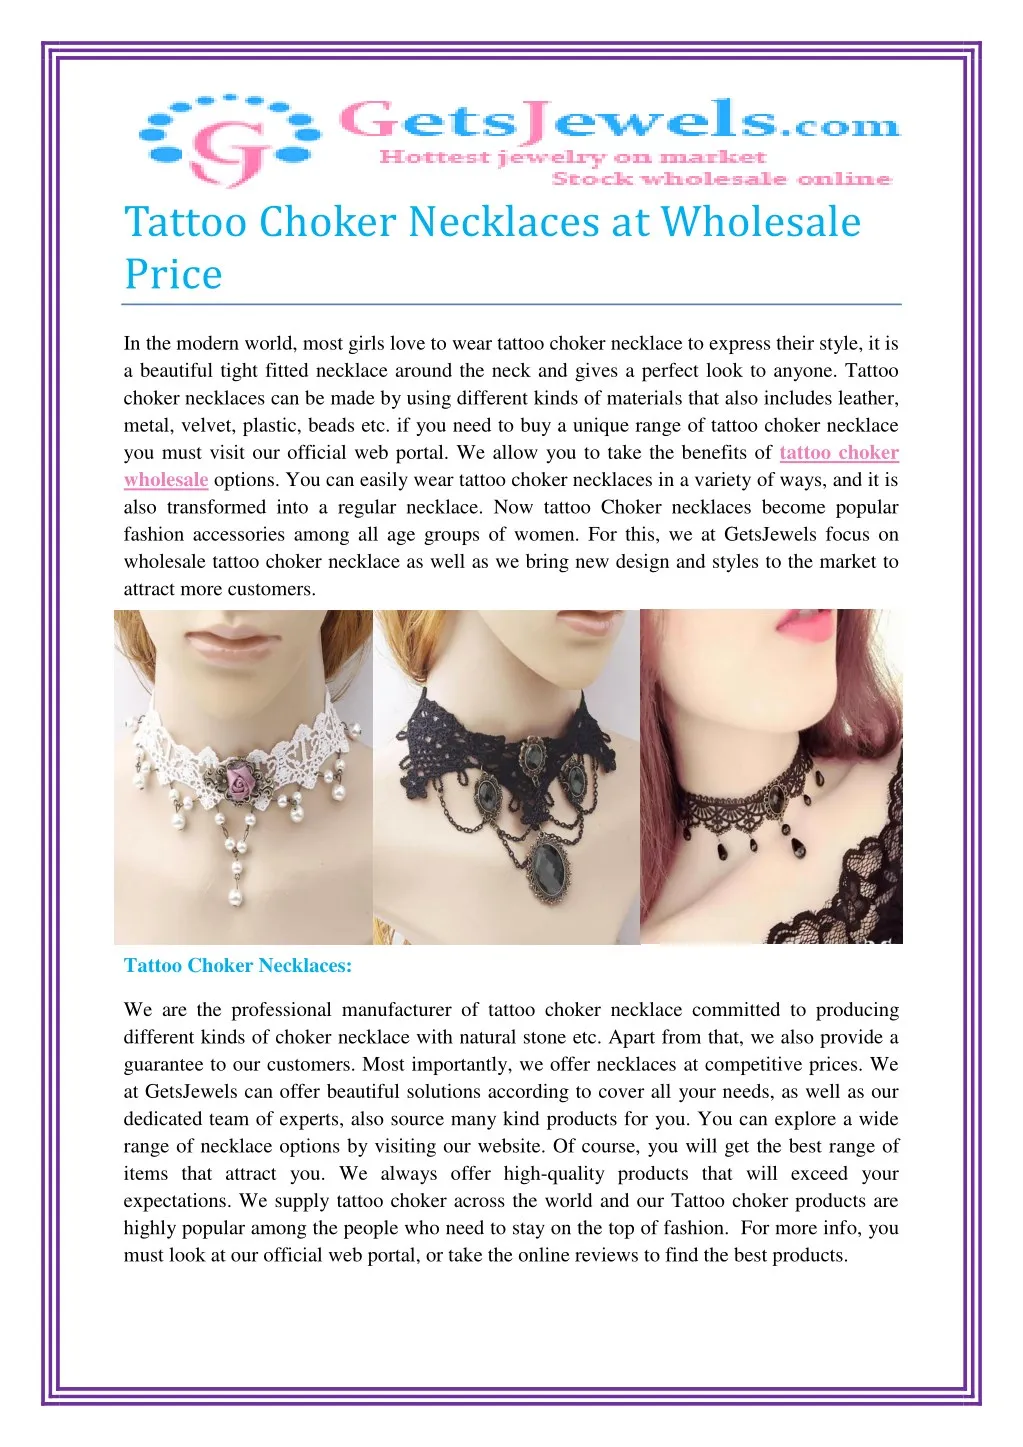 tattoo choker necklaces at wholesale price